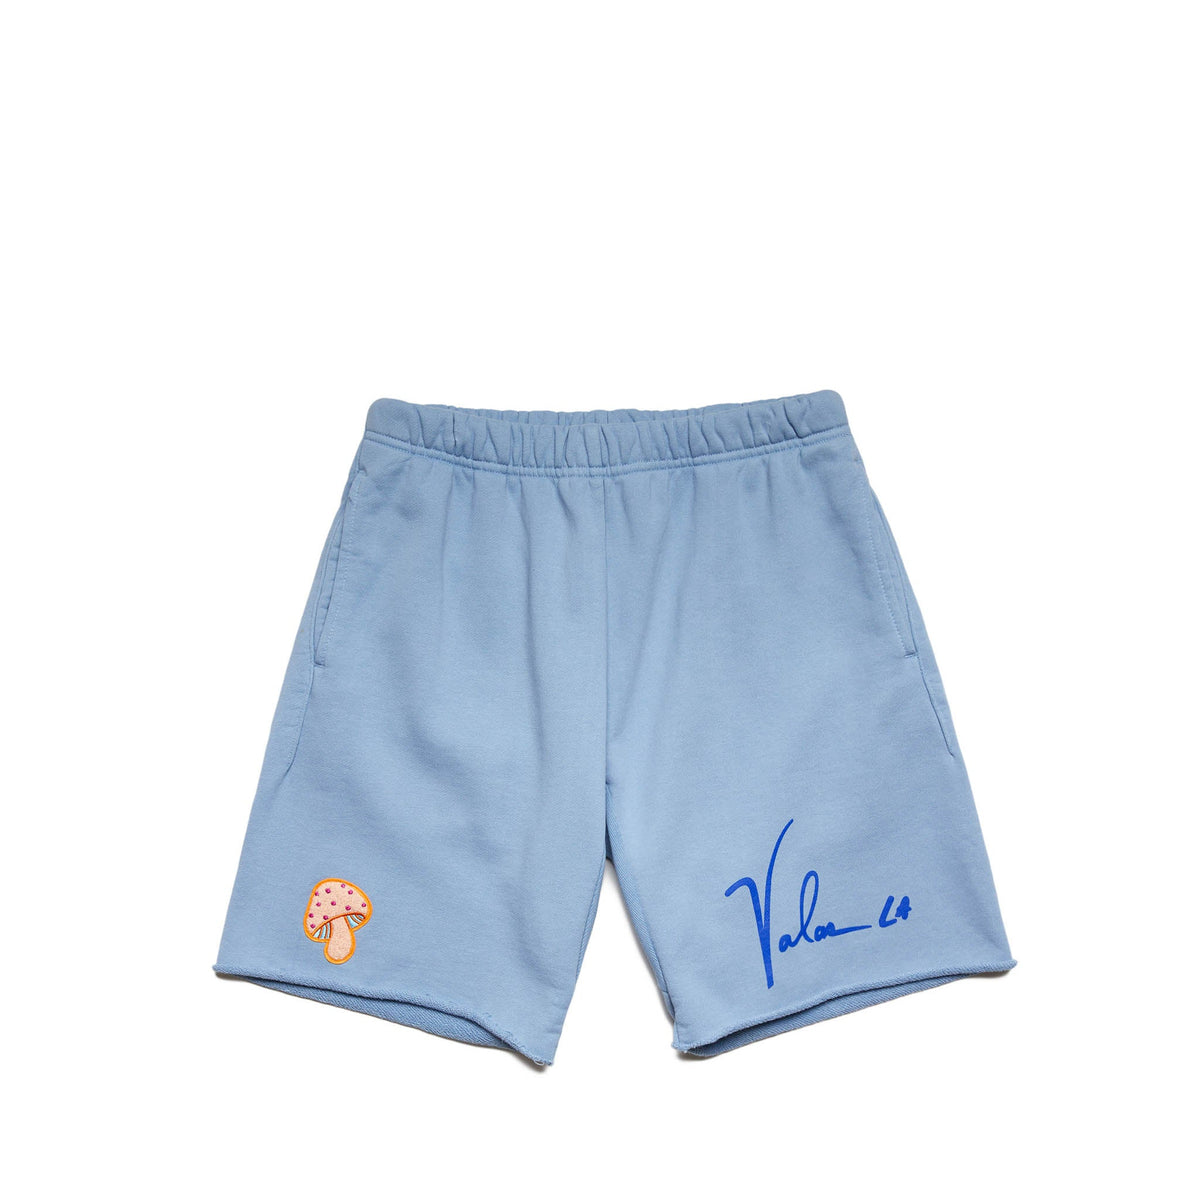 Valas Los Angeles French Terry Shorts